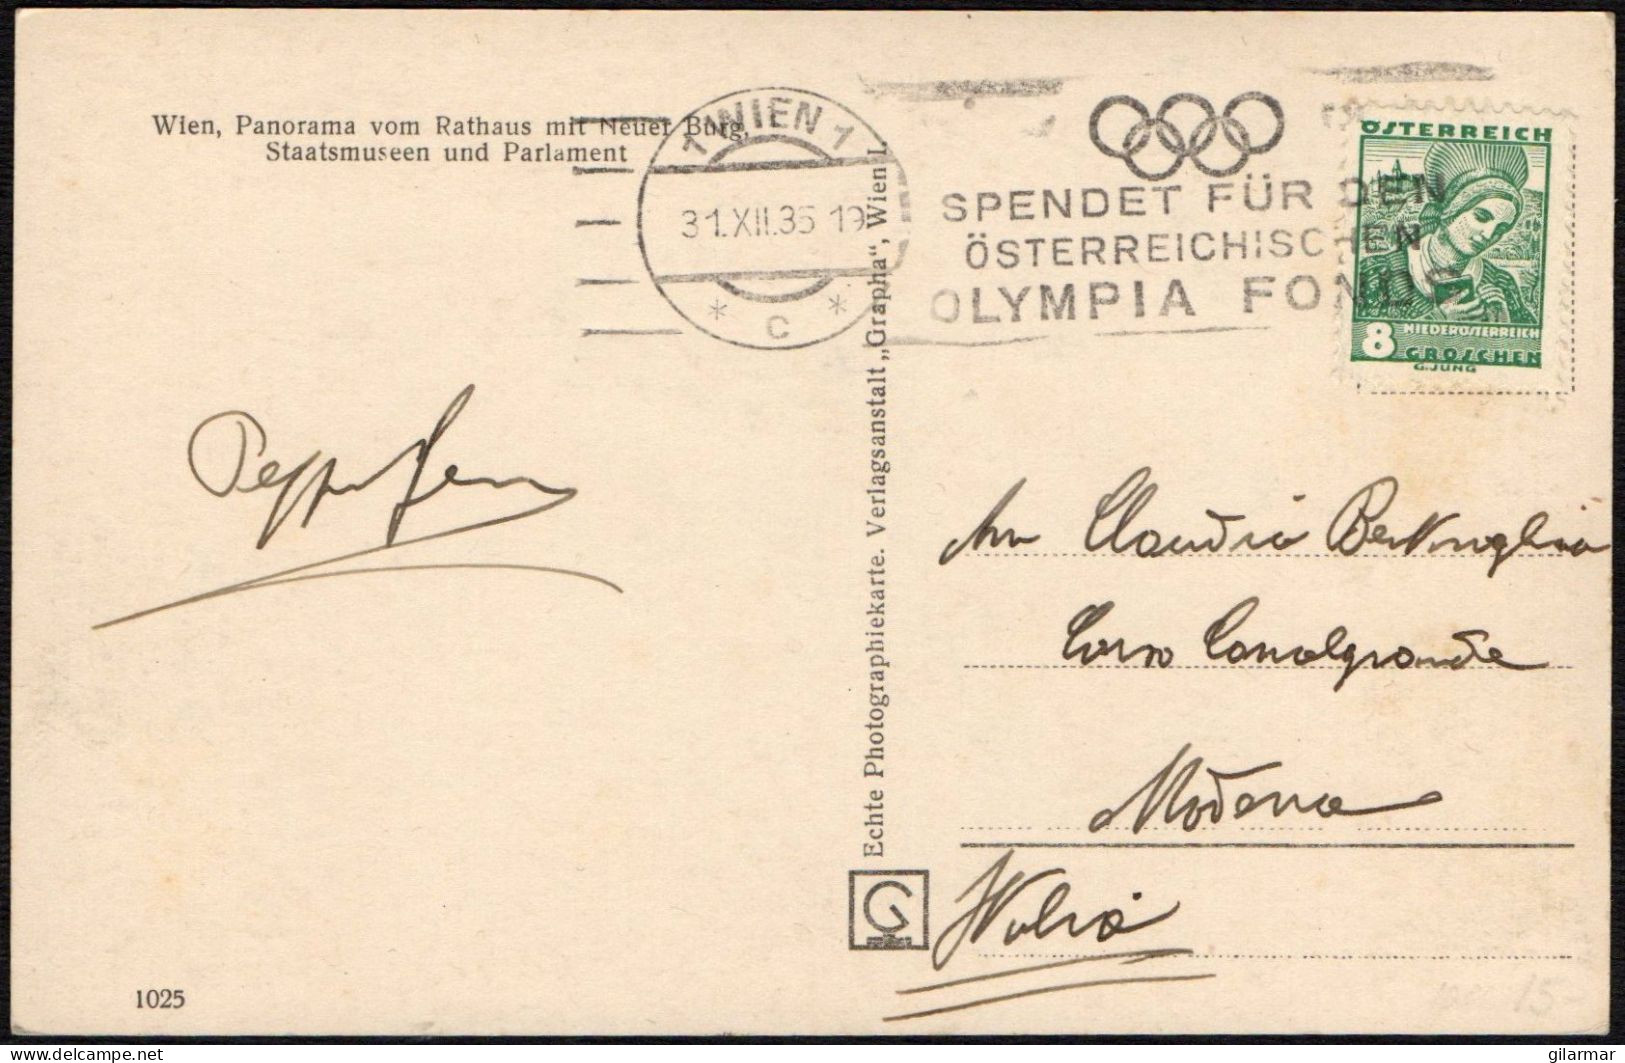 OLYMPIC GAMES 1936 - AUSTRIA WIEN 1 C 1935 - DONATE TO THE AUSTRIAN OLYMPIC FUND - MAILED POSTCARD - M - Sommer 1936: Berlin